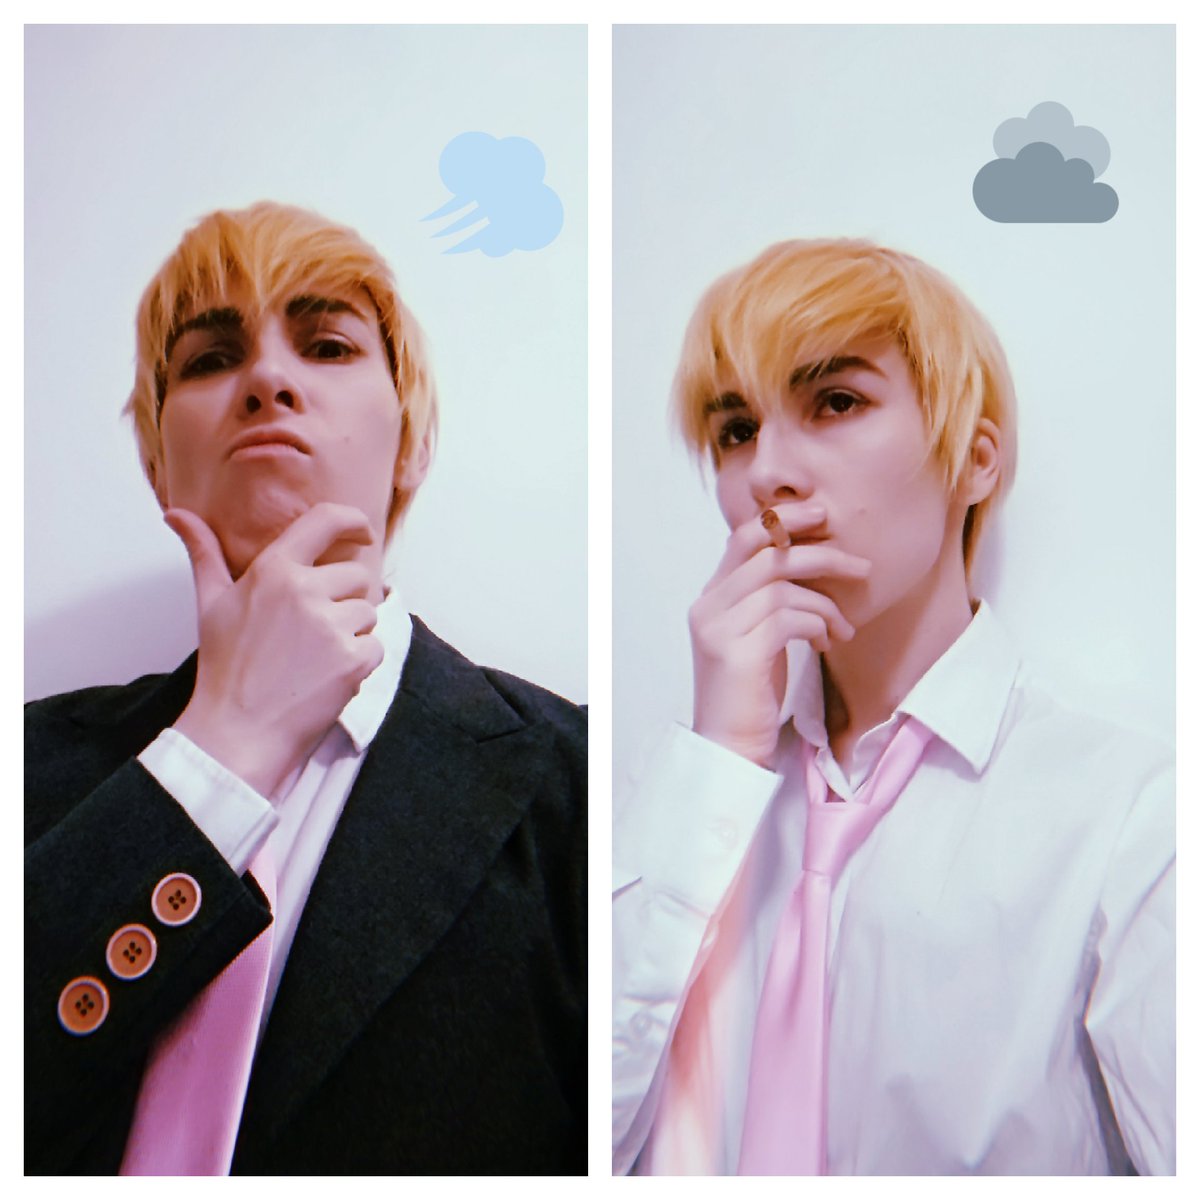 аратака и стикеры. 
Reigen costest
i mean, i gotta contribute somehow.
(also this old af motorola i found in a closet)
#mobpsycho100 